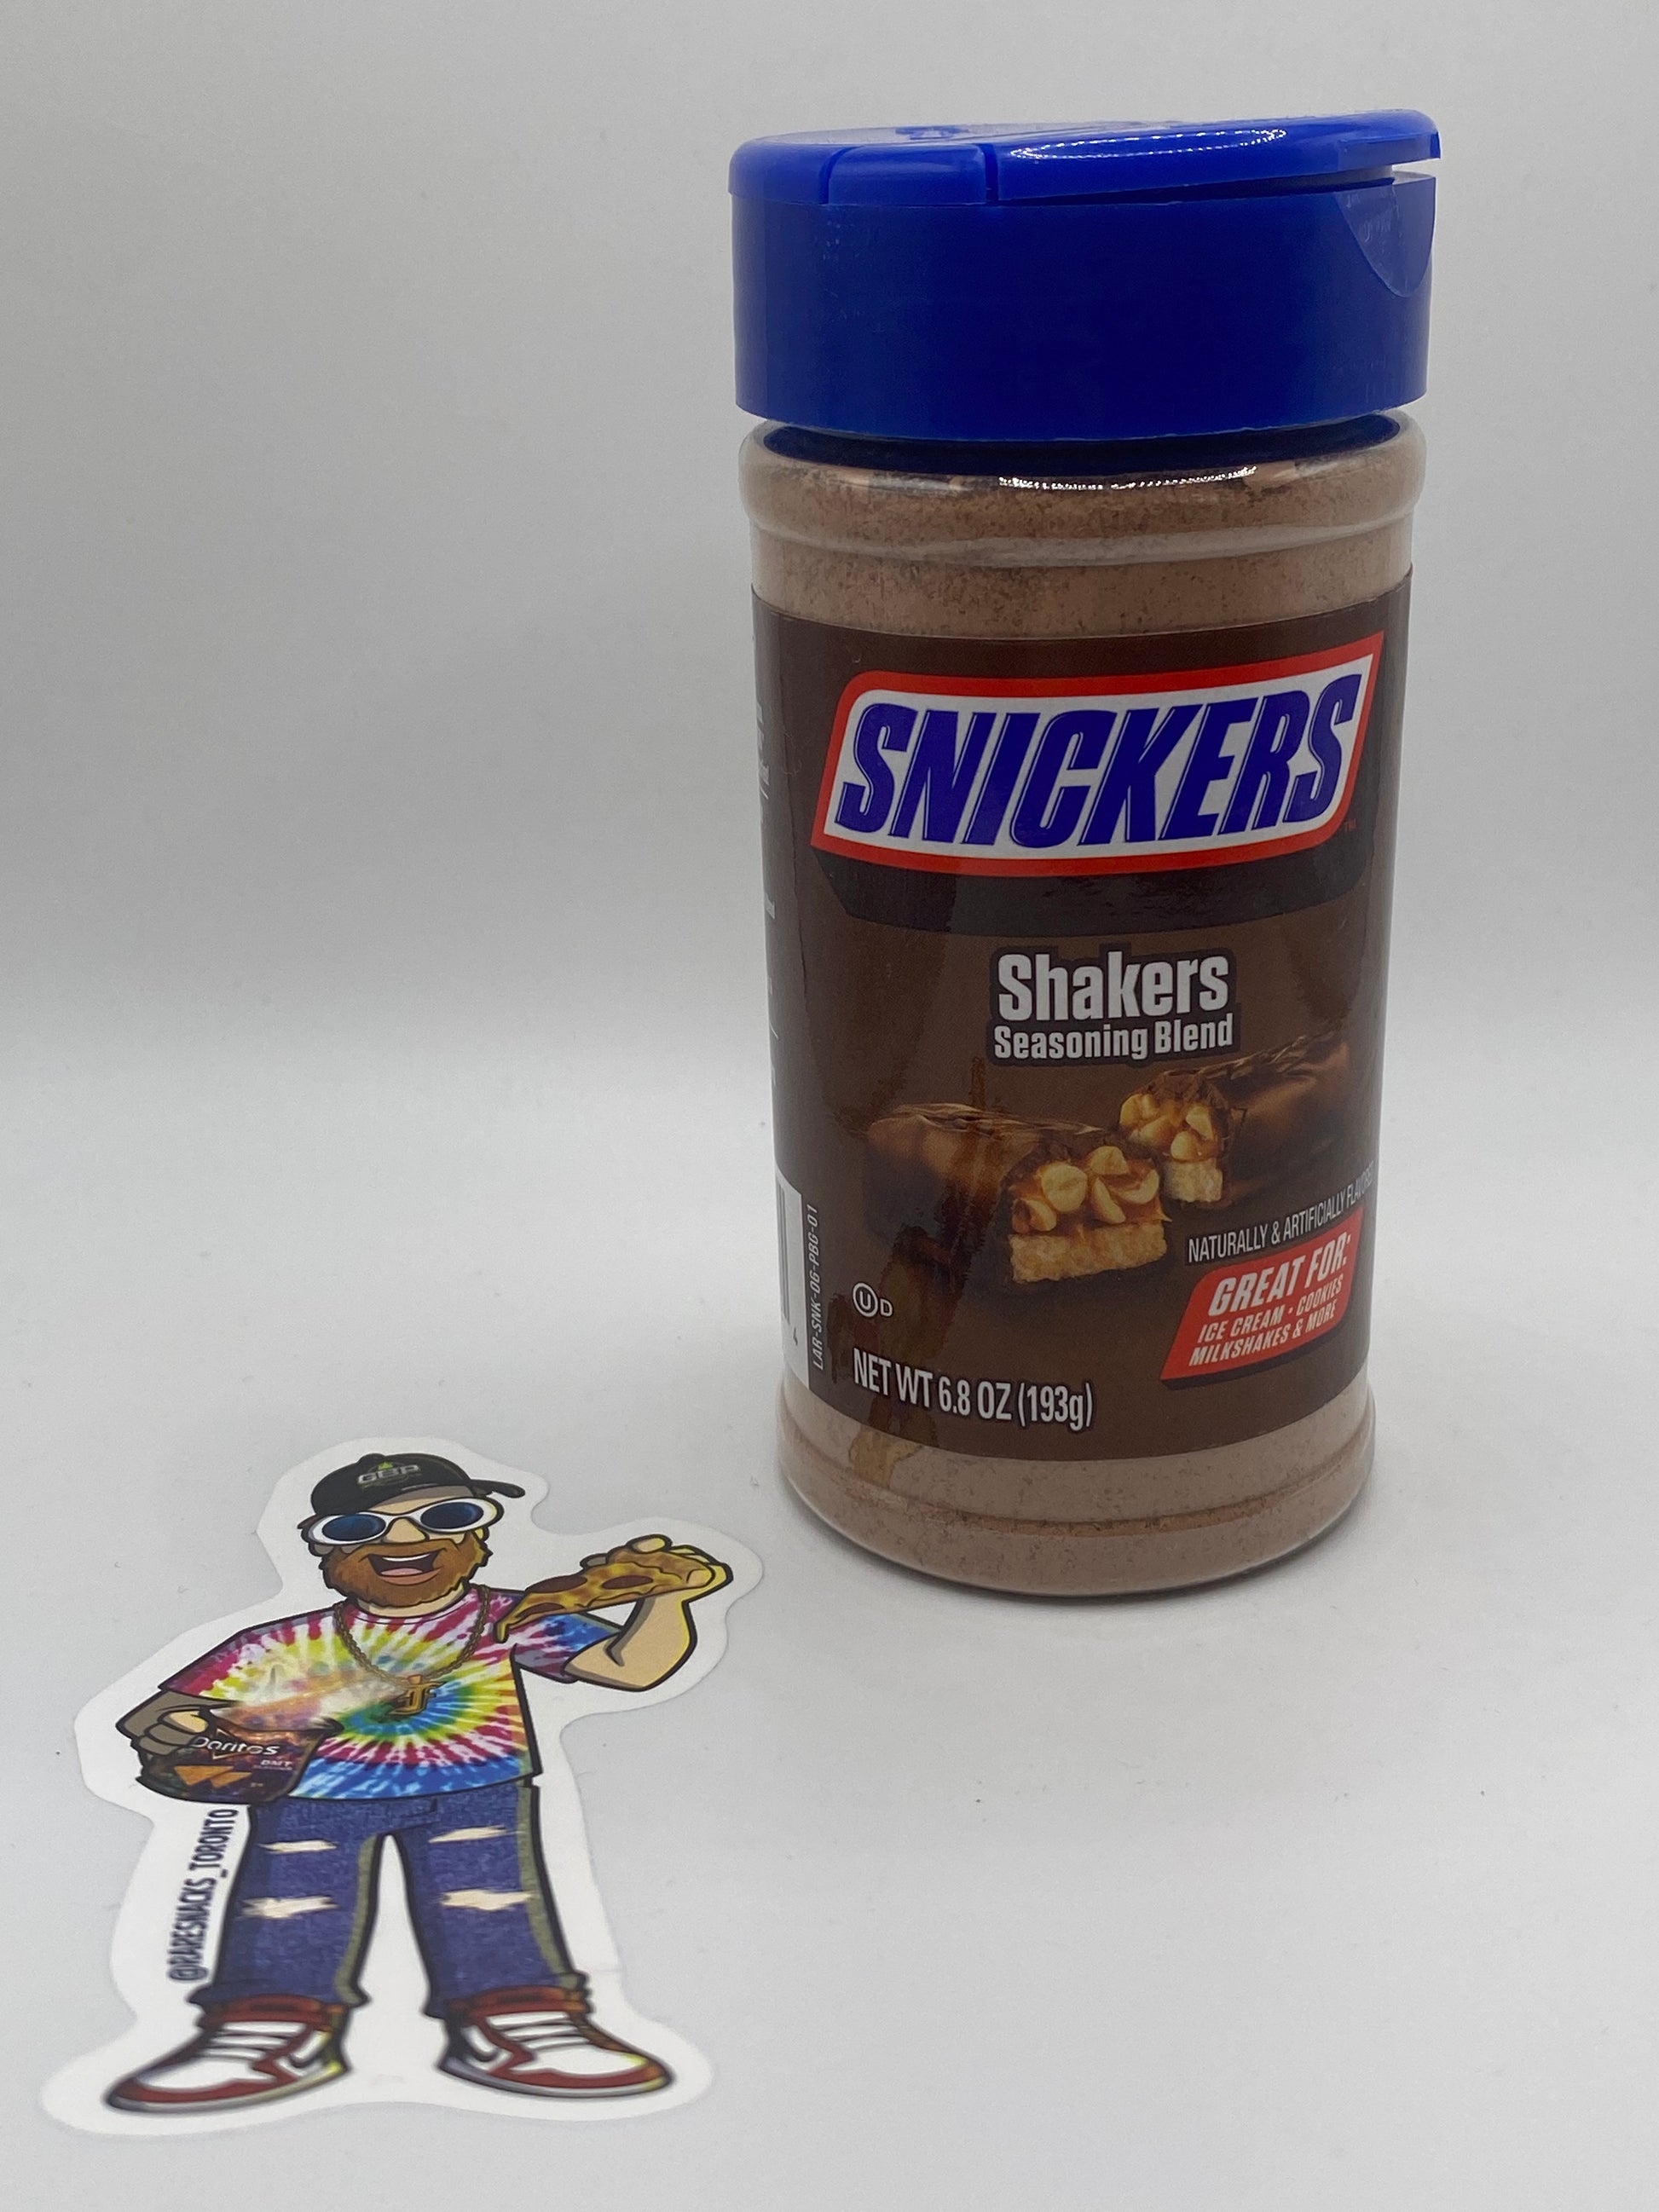 NEW!! Snickers Shakers Seasoning Blend - 6.8oz